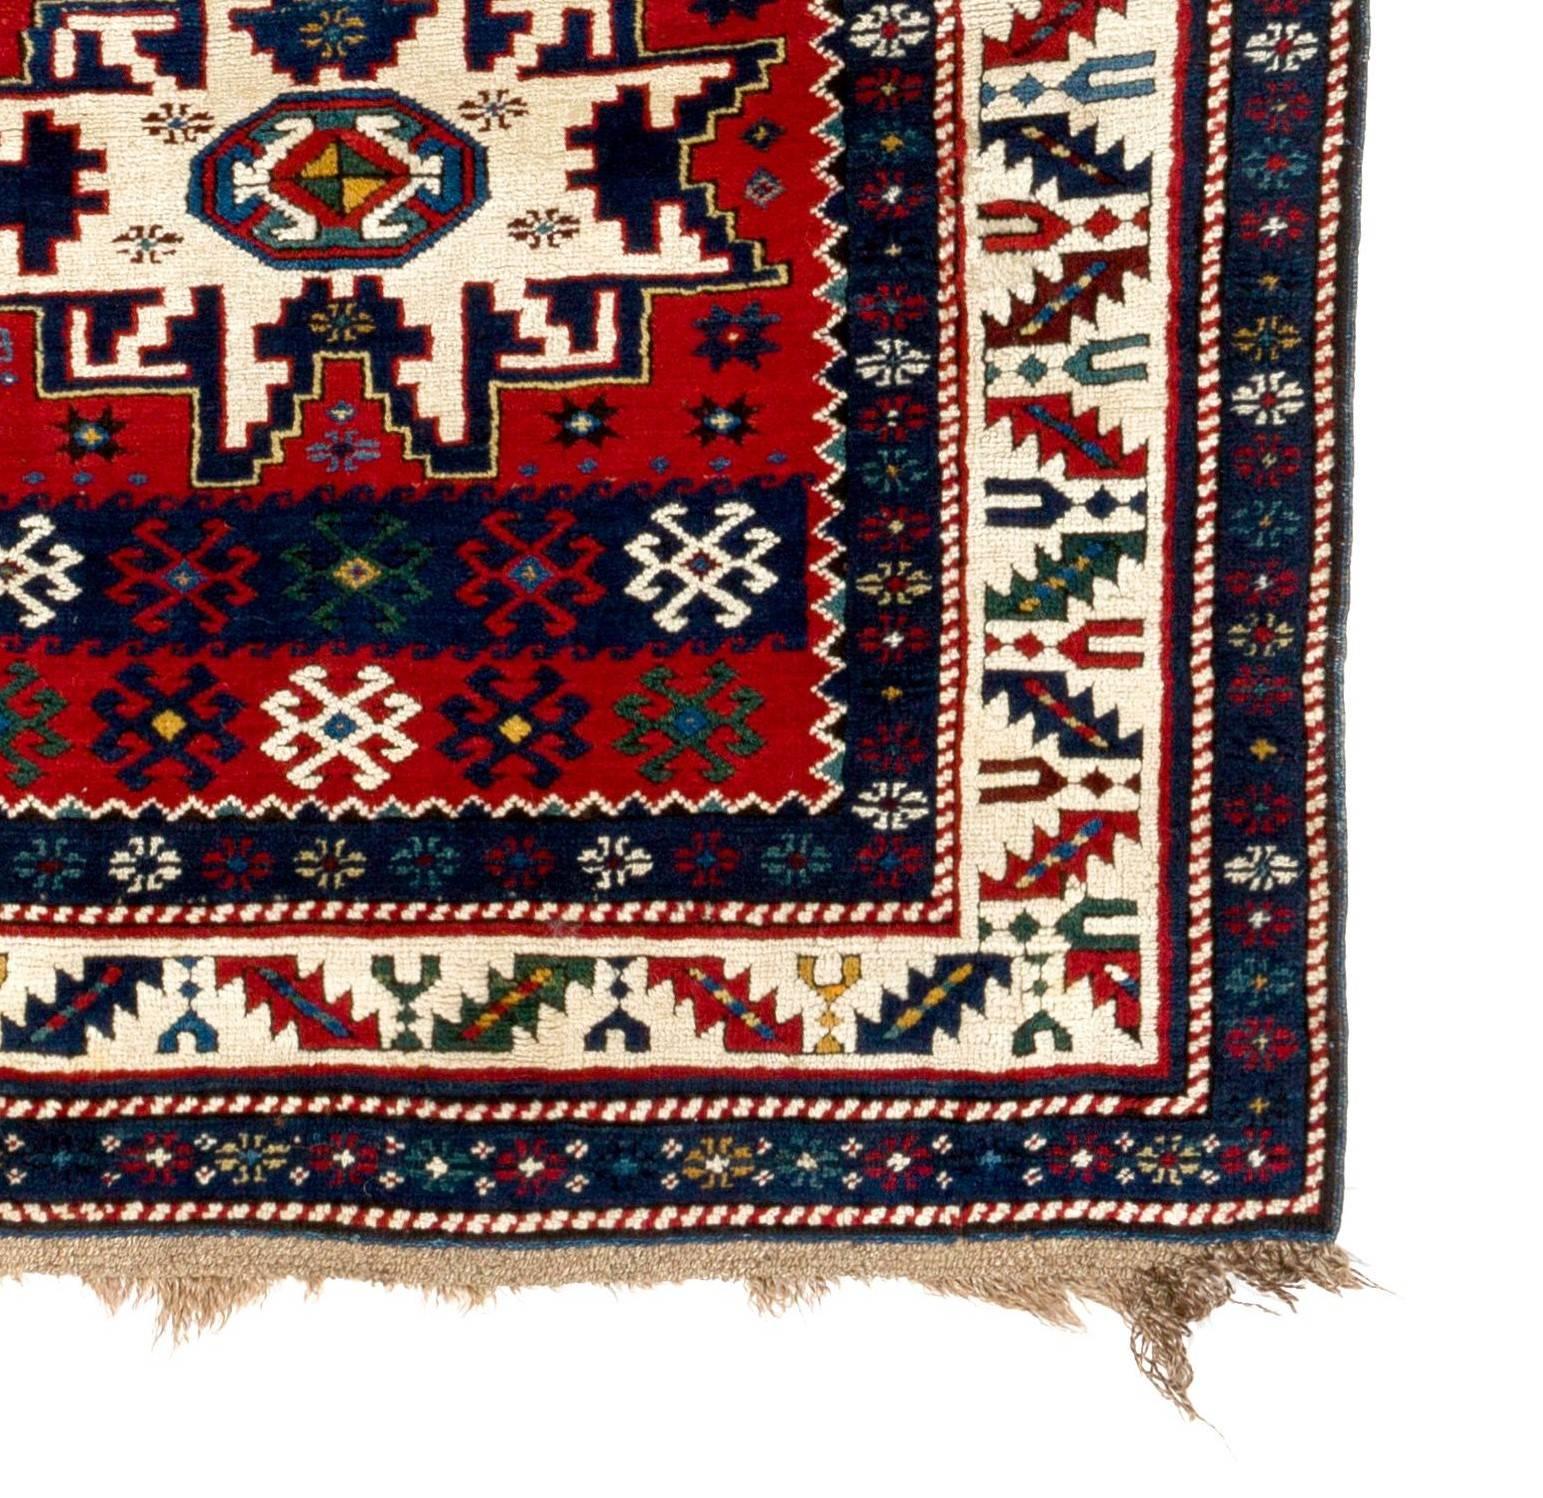 3.7x8.3 Ft Antique Caucasian Karabagh Kazak Rug with Lesghi Stars, Ca 1890 In Excellent Condition For Sale In Philadelphia, PA